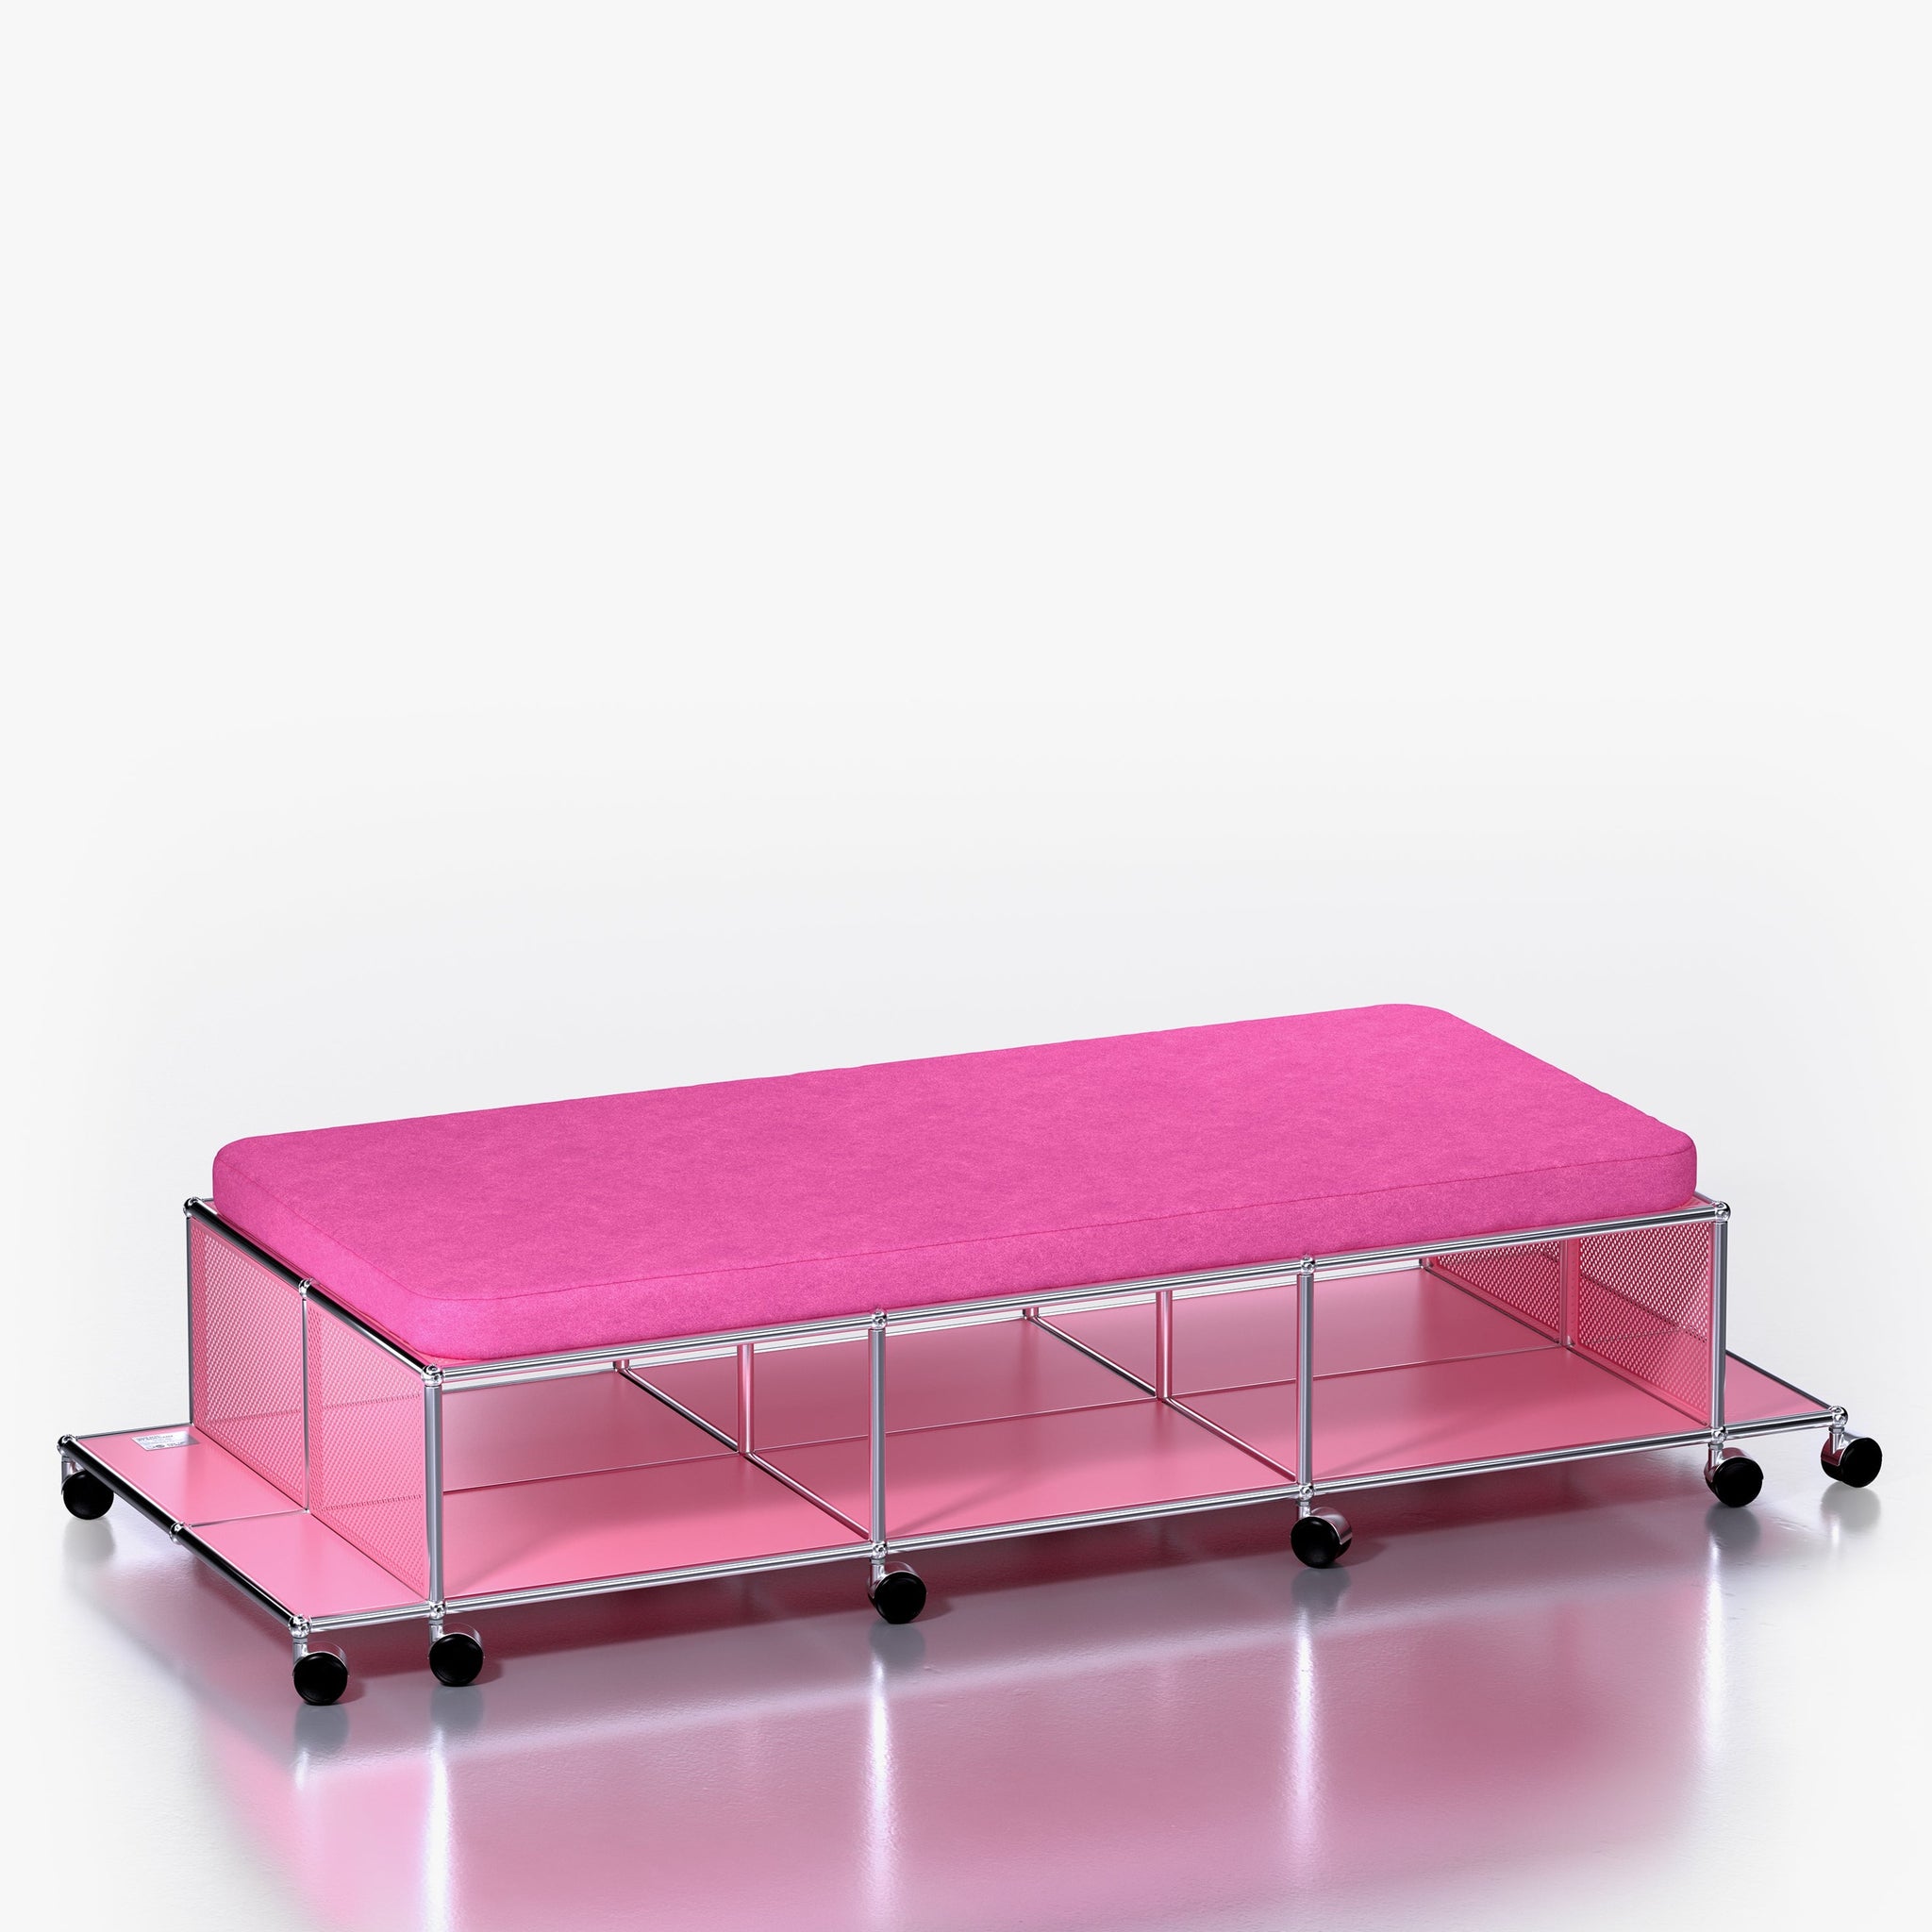 Central Lounge: Modern Storage Bench with Shelves in Downtown Pink (Side View)